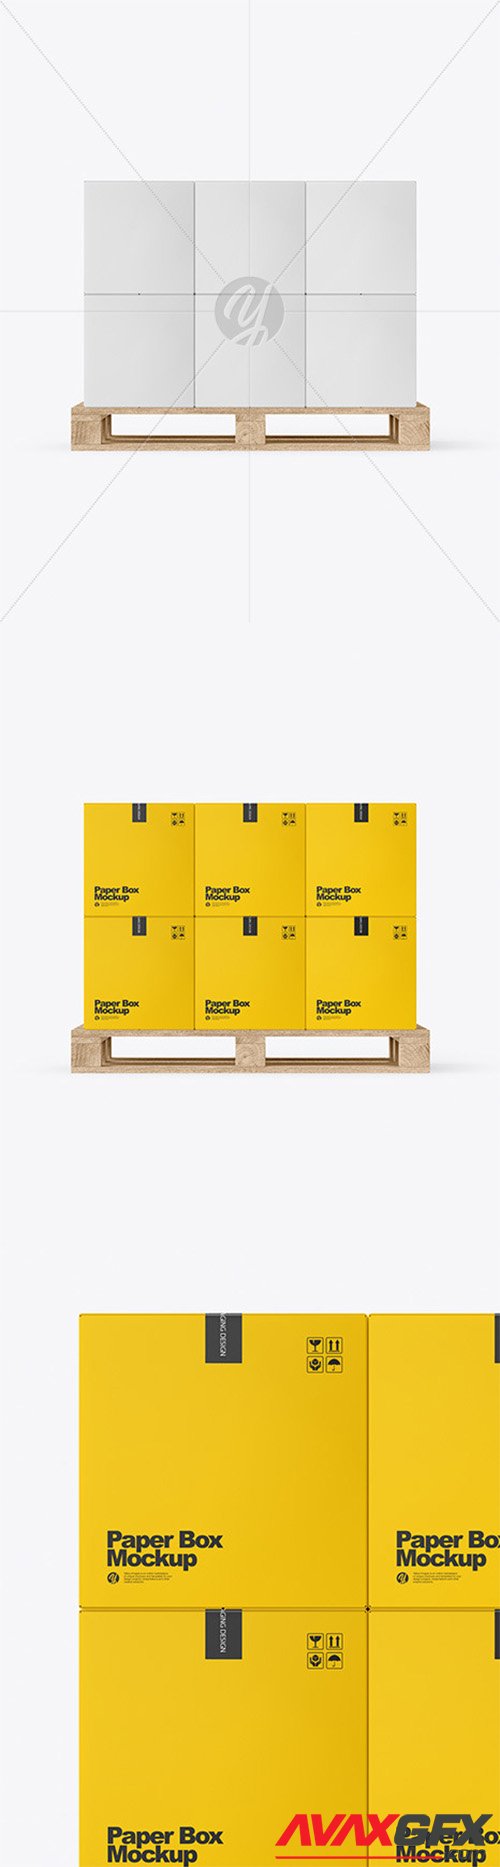 Wooden Pallet With Paper Boxes Mockup 66459